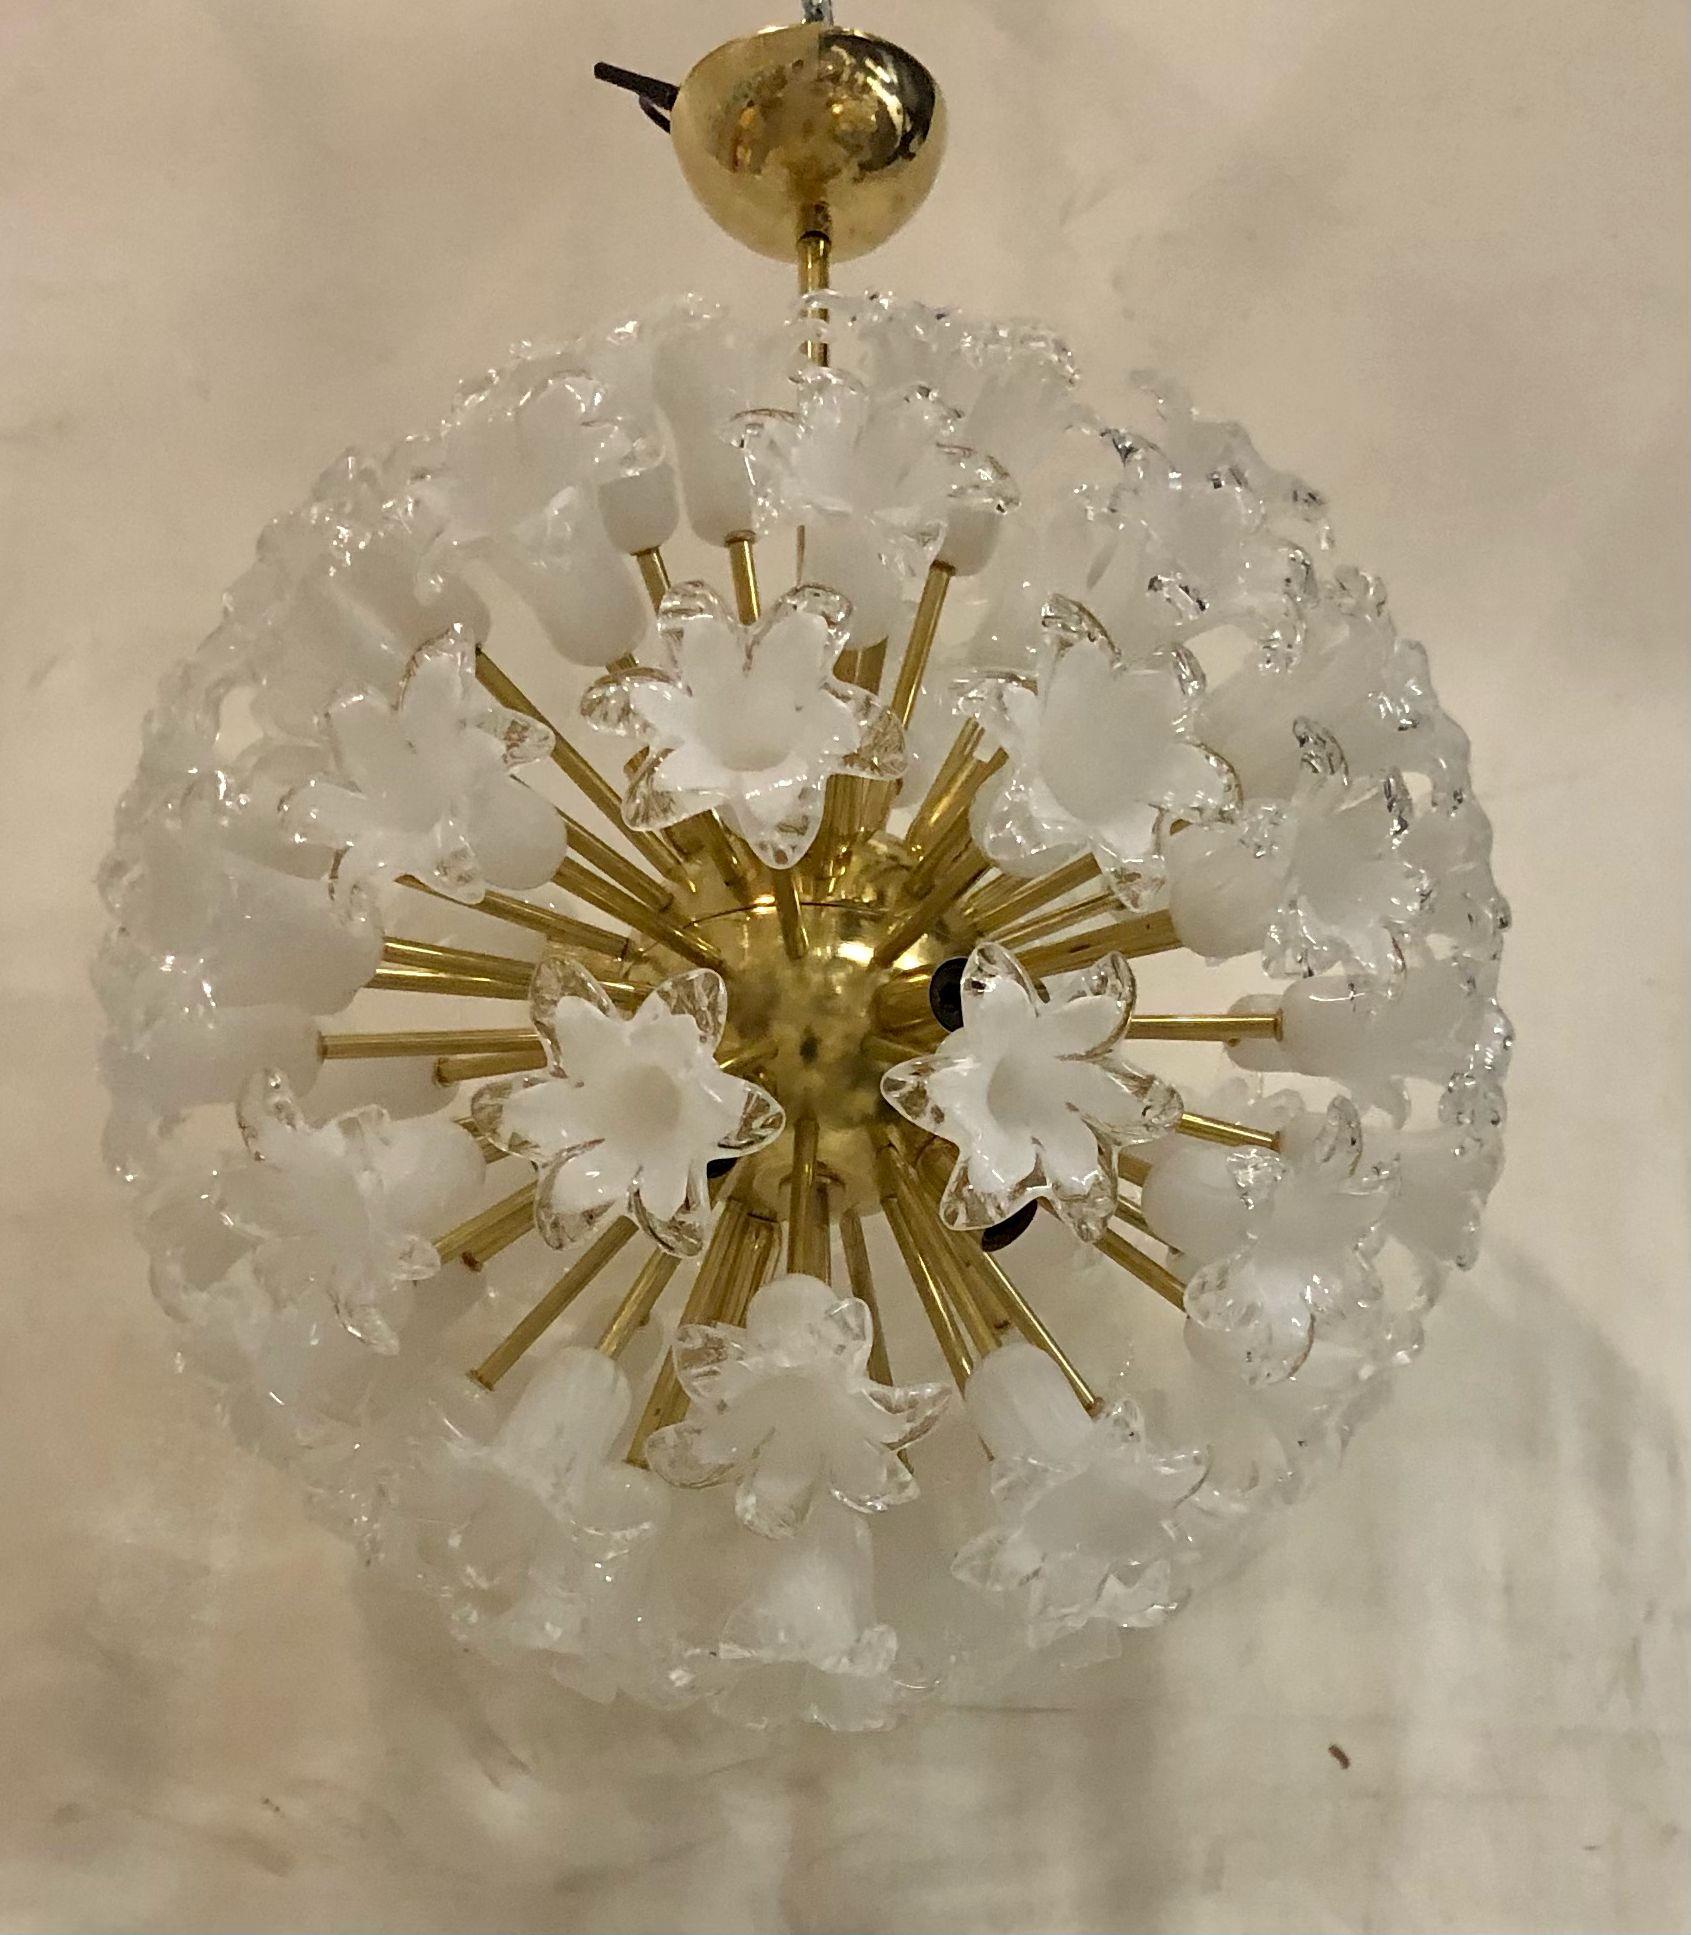 The large glass flowers make up this Murano chandelier from the 1980. A classic Sputnik from the middle of the century.

The chandelier consists of a large central sphere in which brass rods are screwed, white glass flowers are placed above the